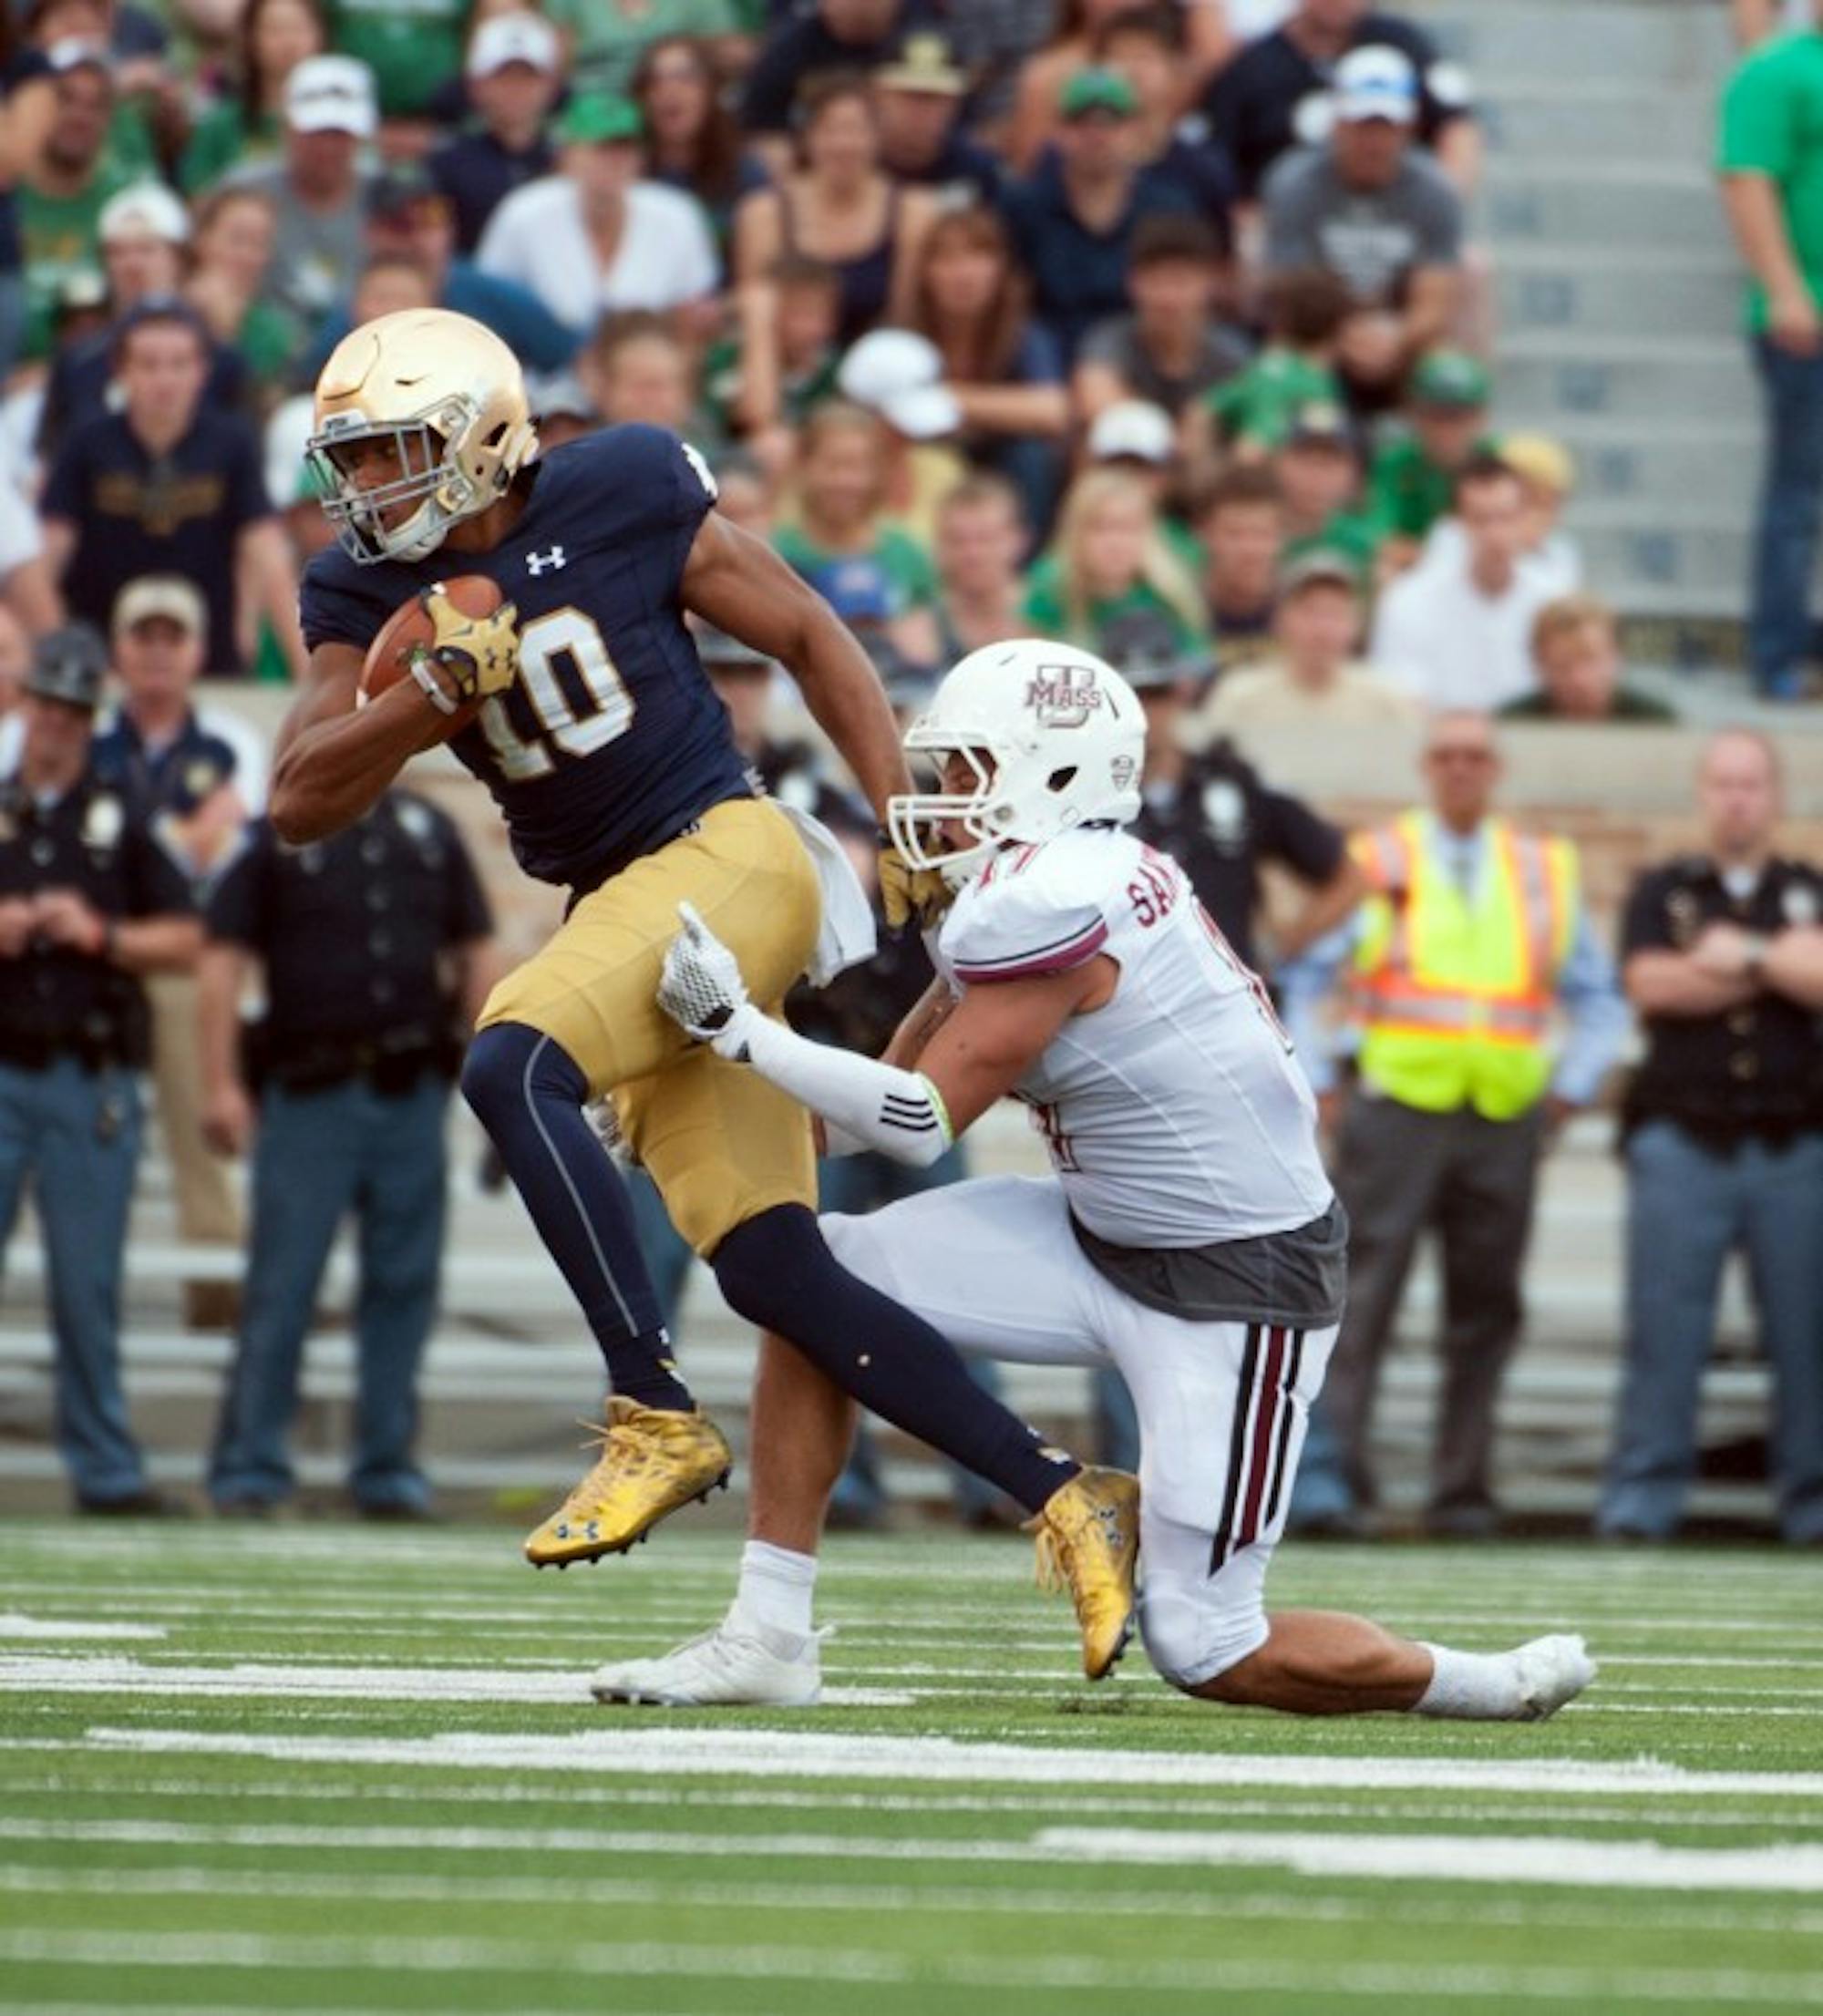 Freshman tight end Alizé Jones sheds a tackle during Notre Dame's 62-27 win over Massachusetts on Saturday at Notre Dame Stadium.